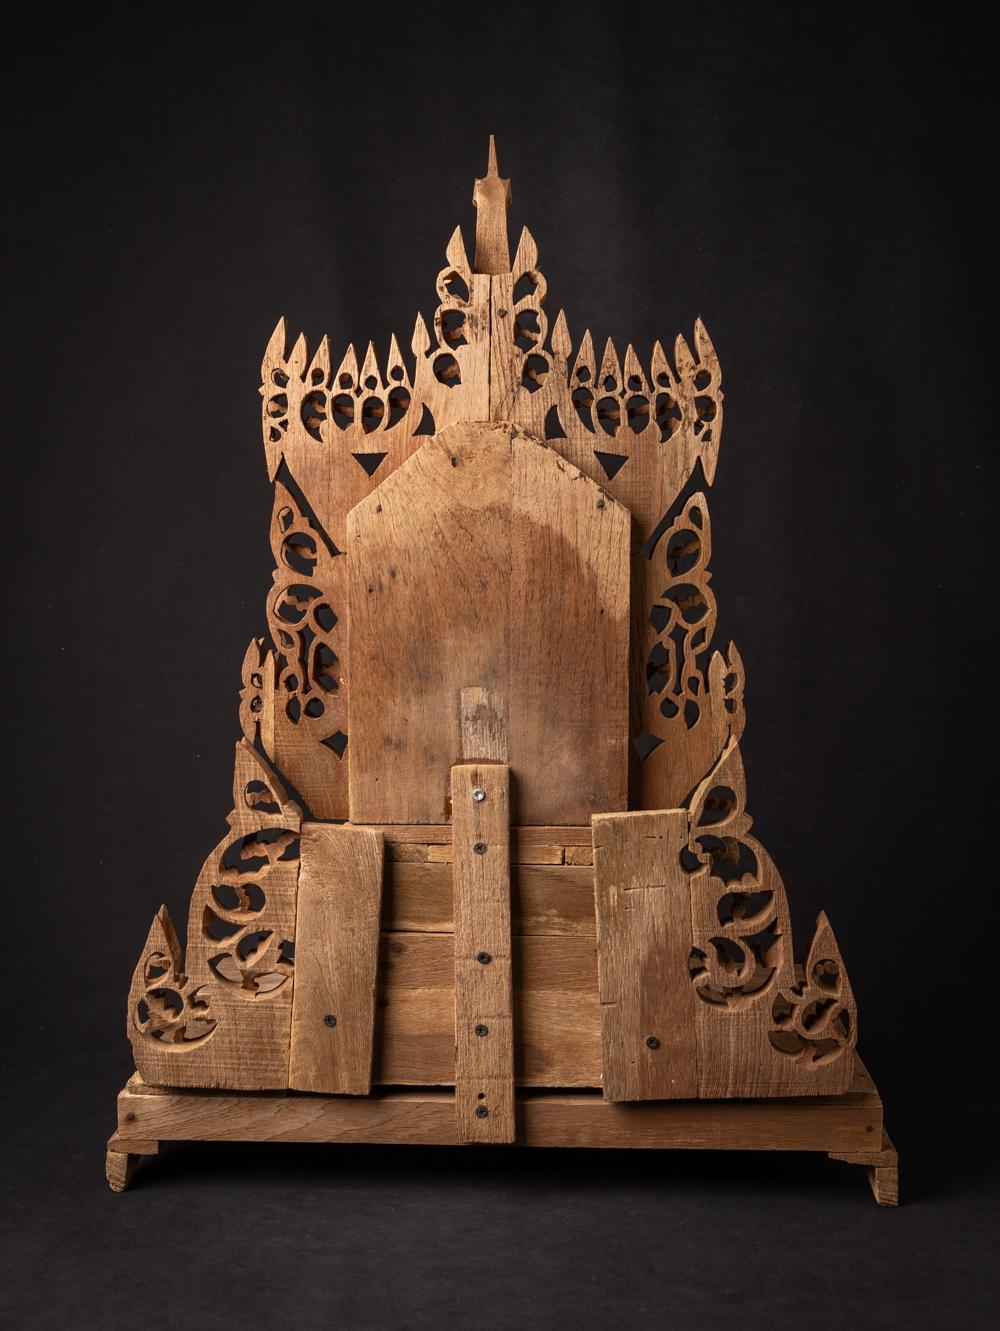 This Middle 20th century Old wooden Burmese Buddha Altar is a stunning testament to the rich spiritual and artistic heritage of Burma. Crafted from wood and standing at a height of 71,5 cm, with dimensions of 53 cm in width and 36 cm in depth, it